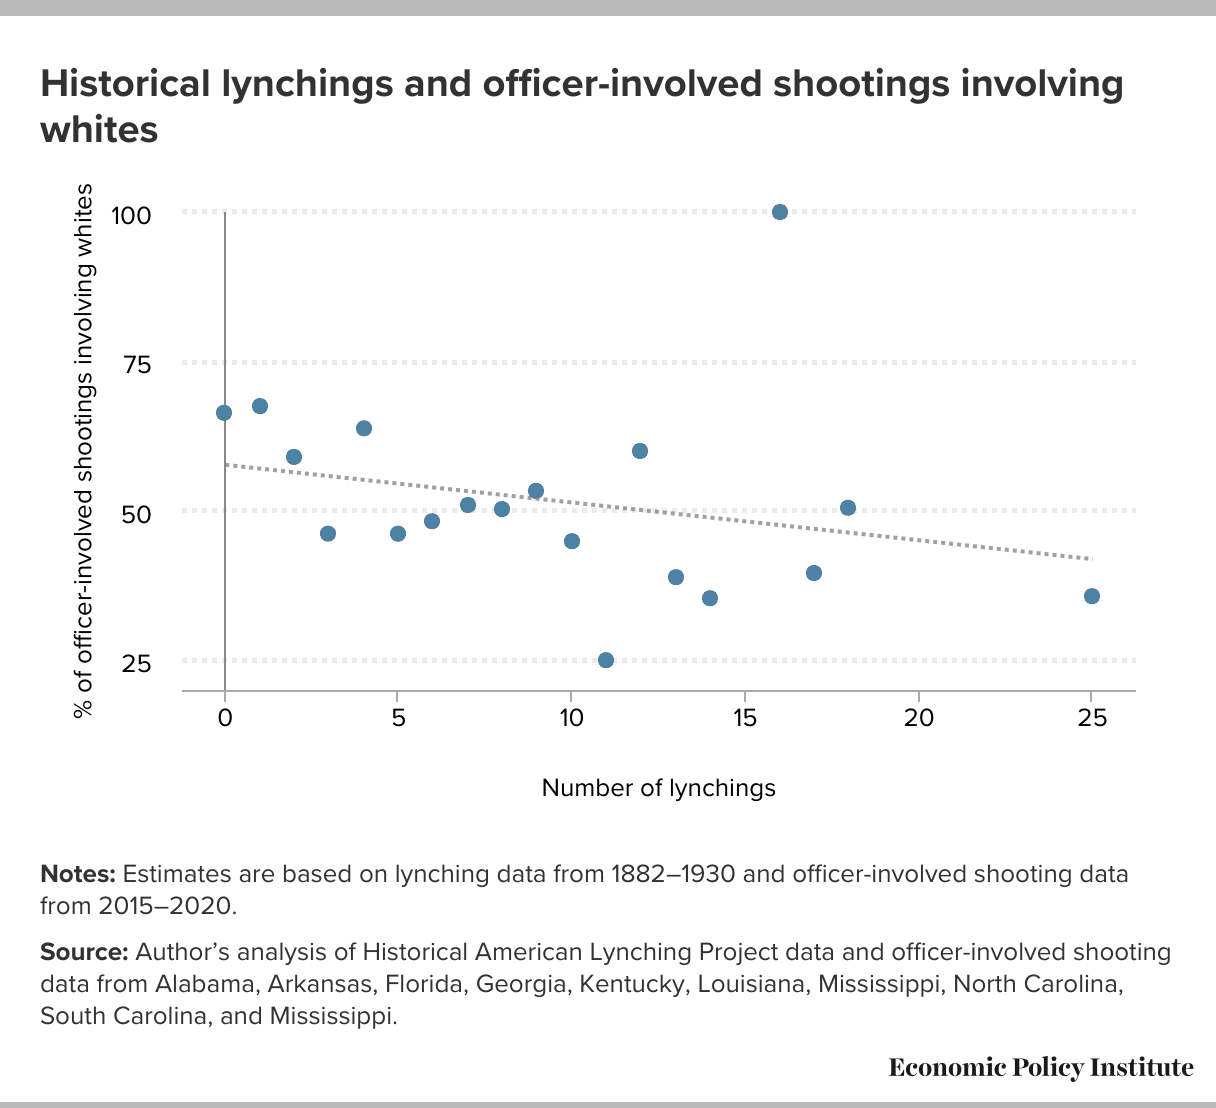 Historical lynchings and officer-involved shootings involving whites